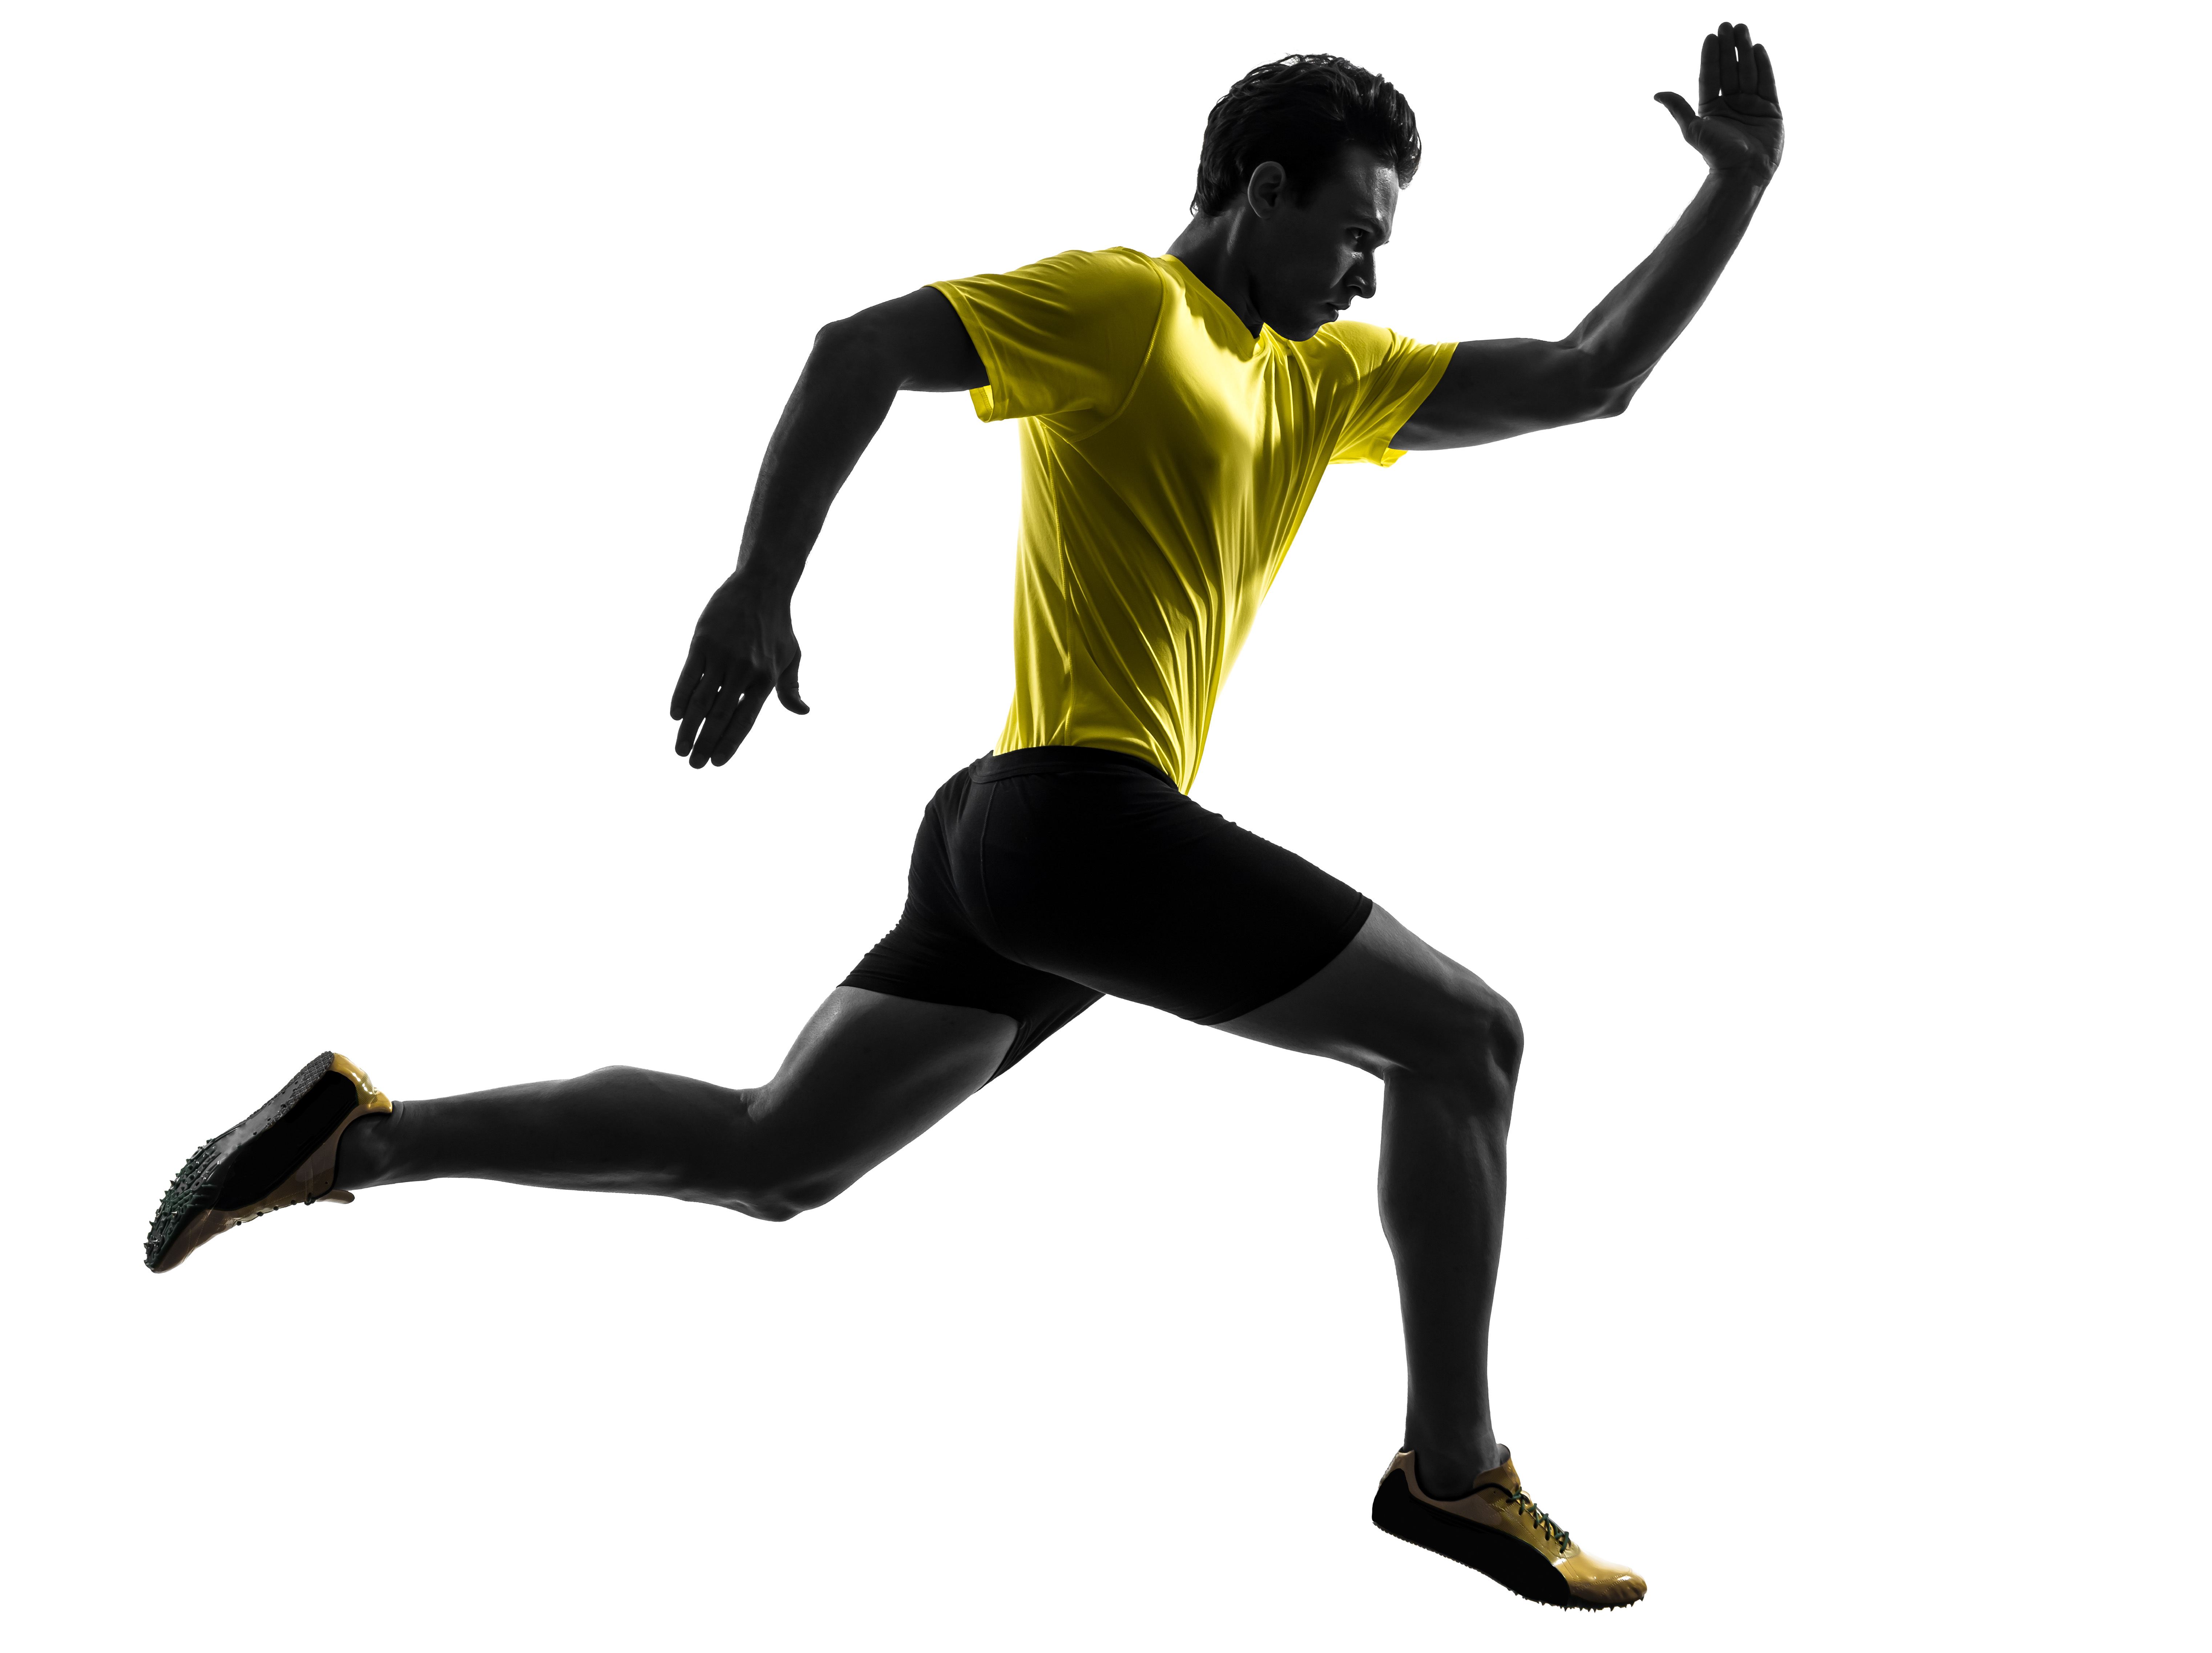 Running Person | Free Download Clip Art | Free Clip Art | on ...